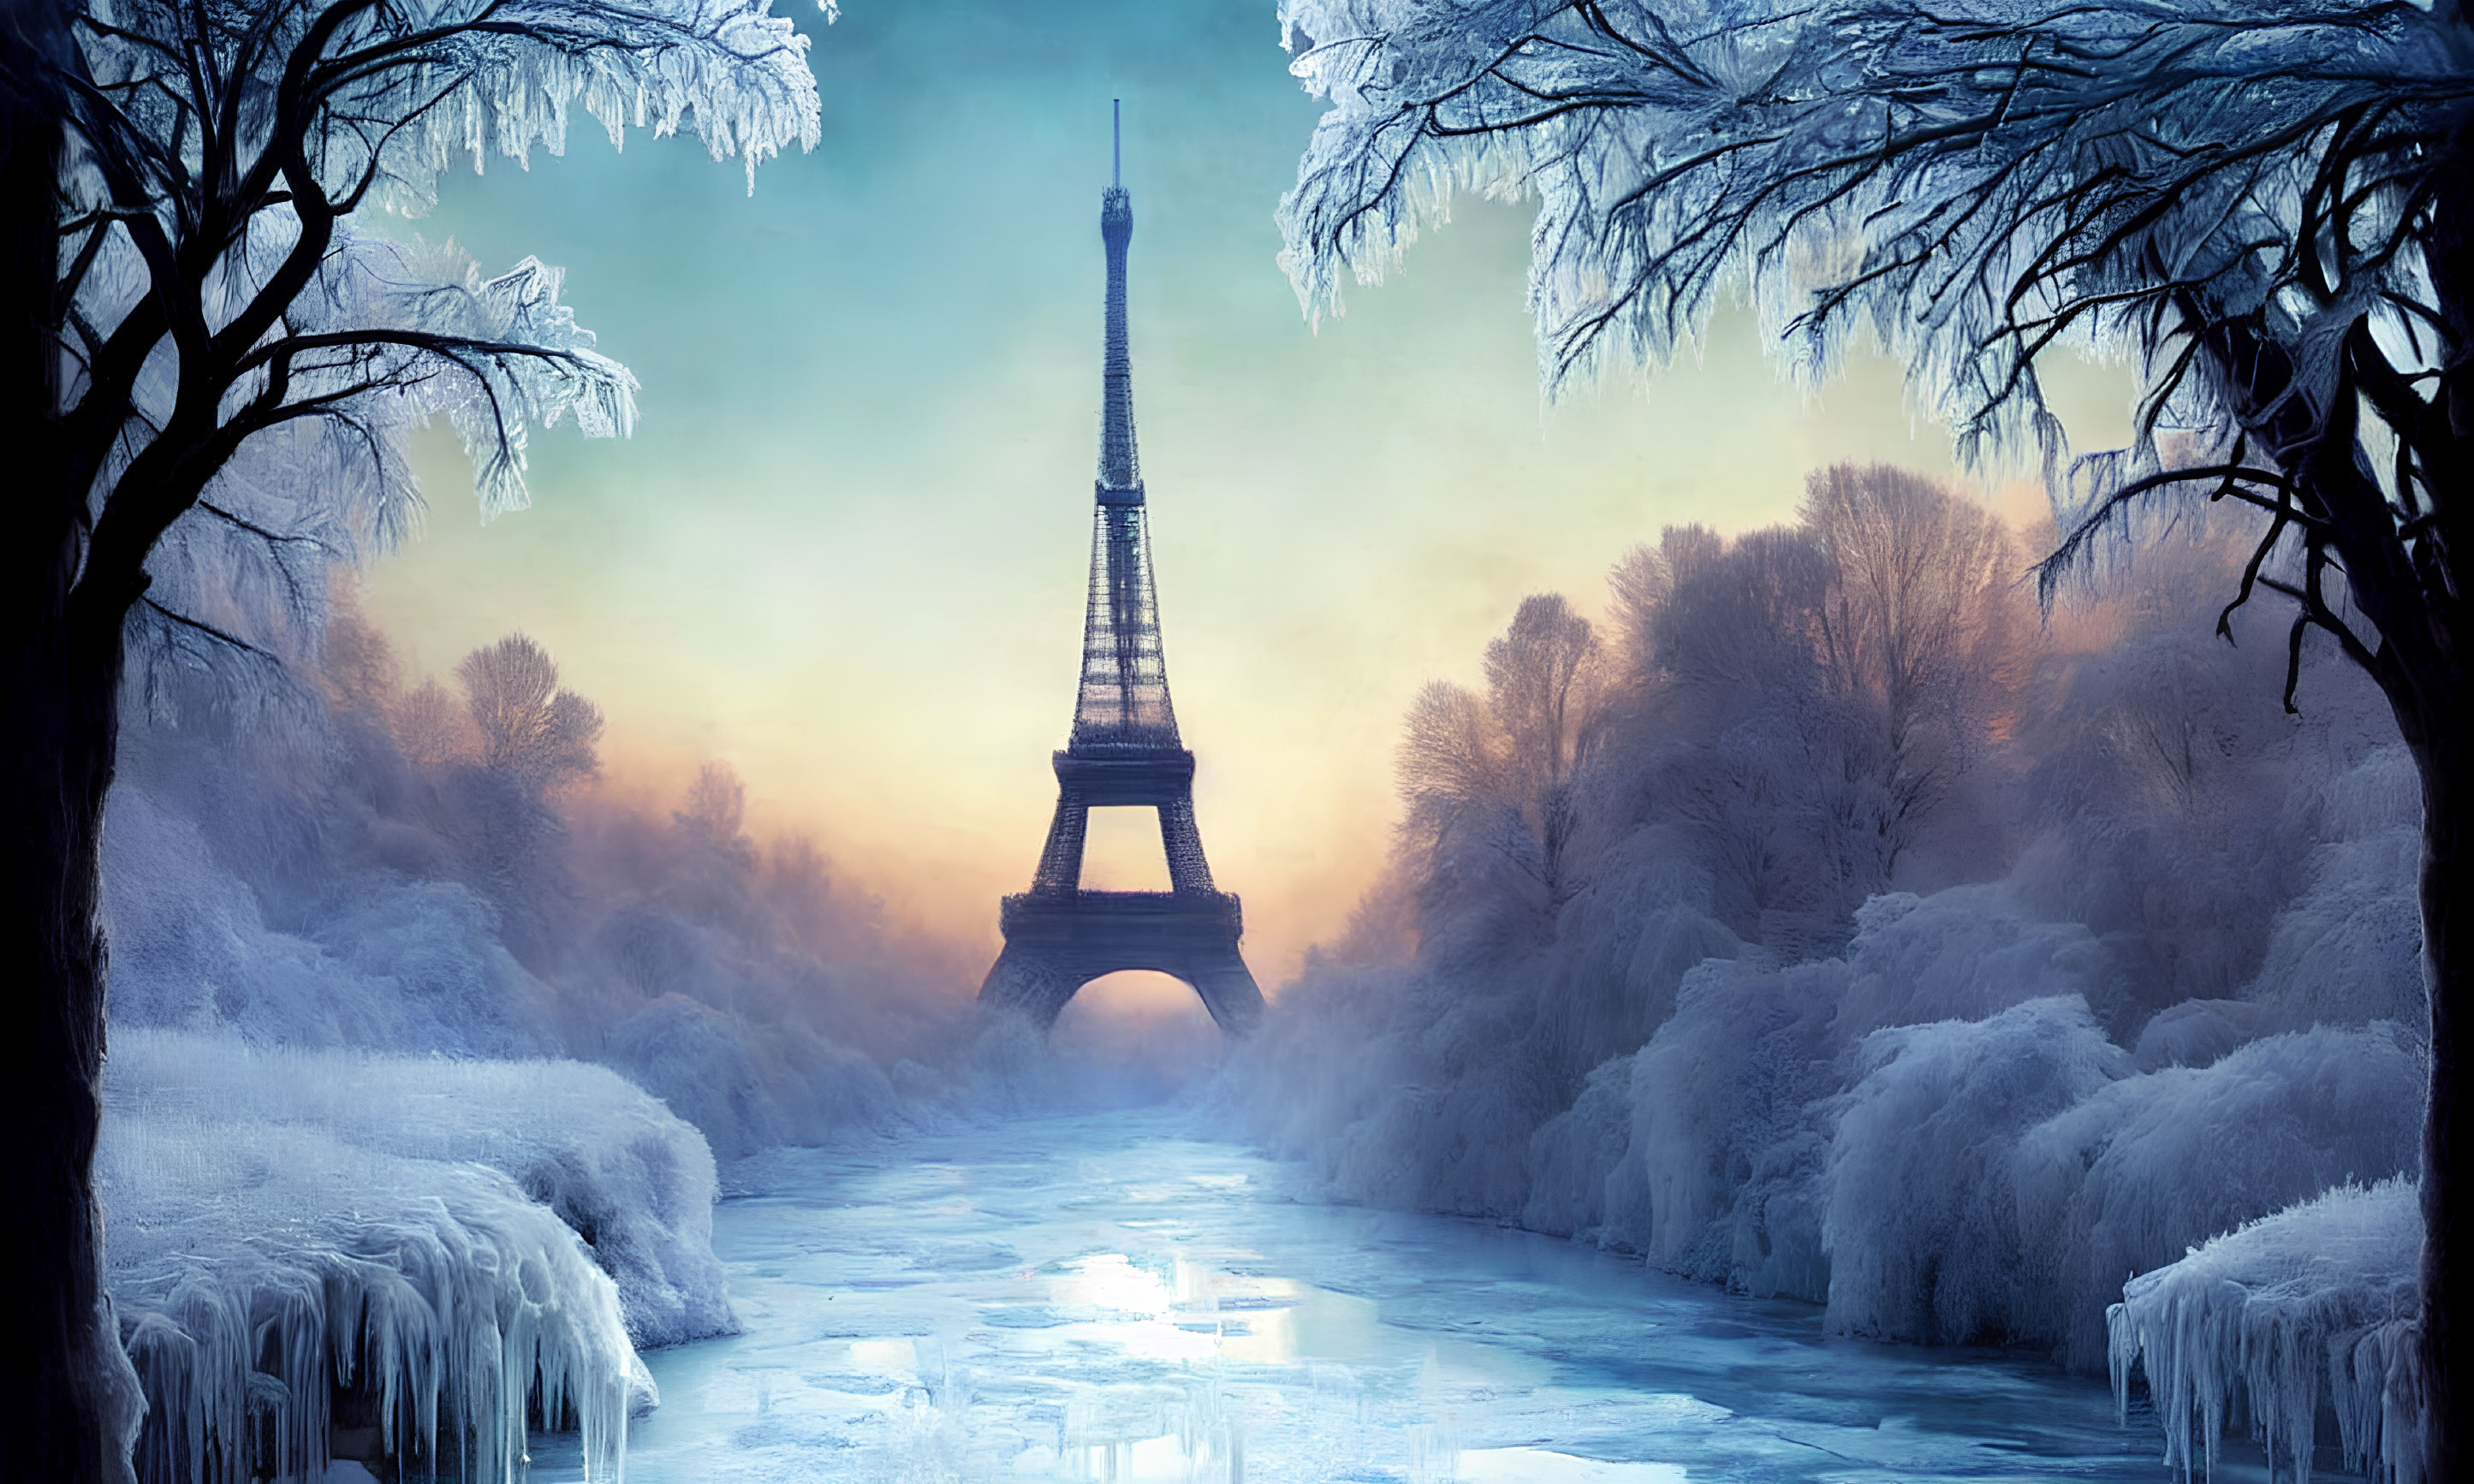 Frost-covered Eiffel Tower in wintry landscape with frozen river and sunrise colors.